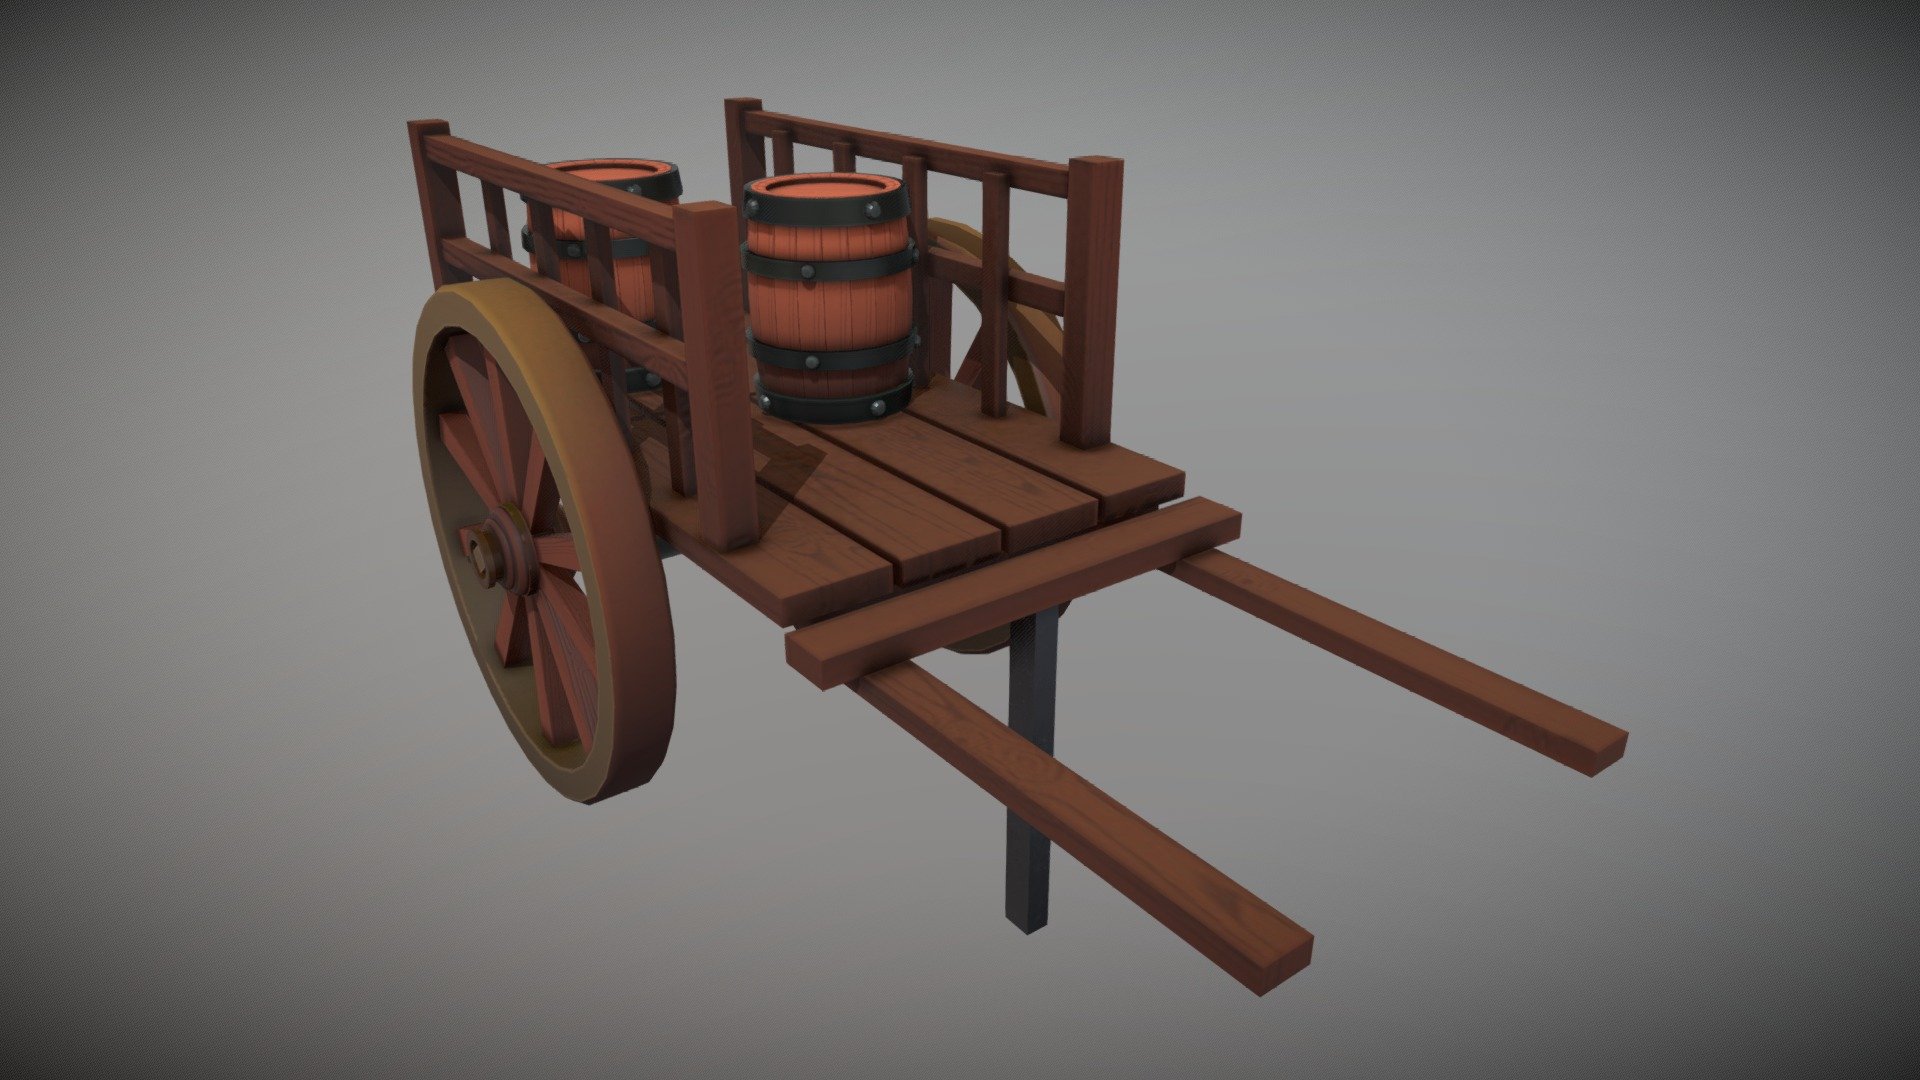 A stylized cart i made for my Pirate Alley, a school project.
I used Maya to make the model and Substance Painter for textures 3d model